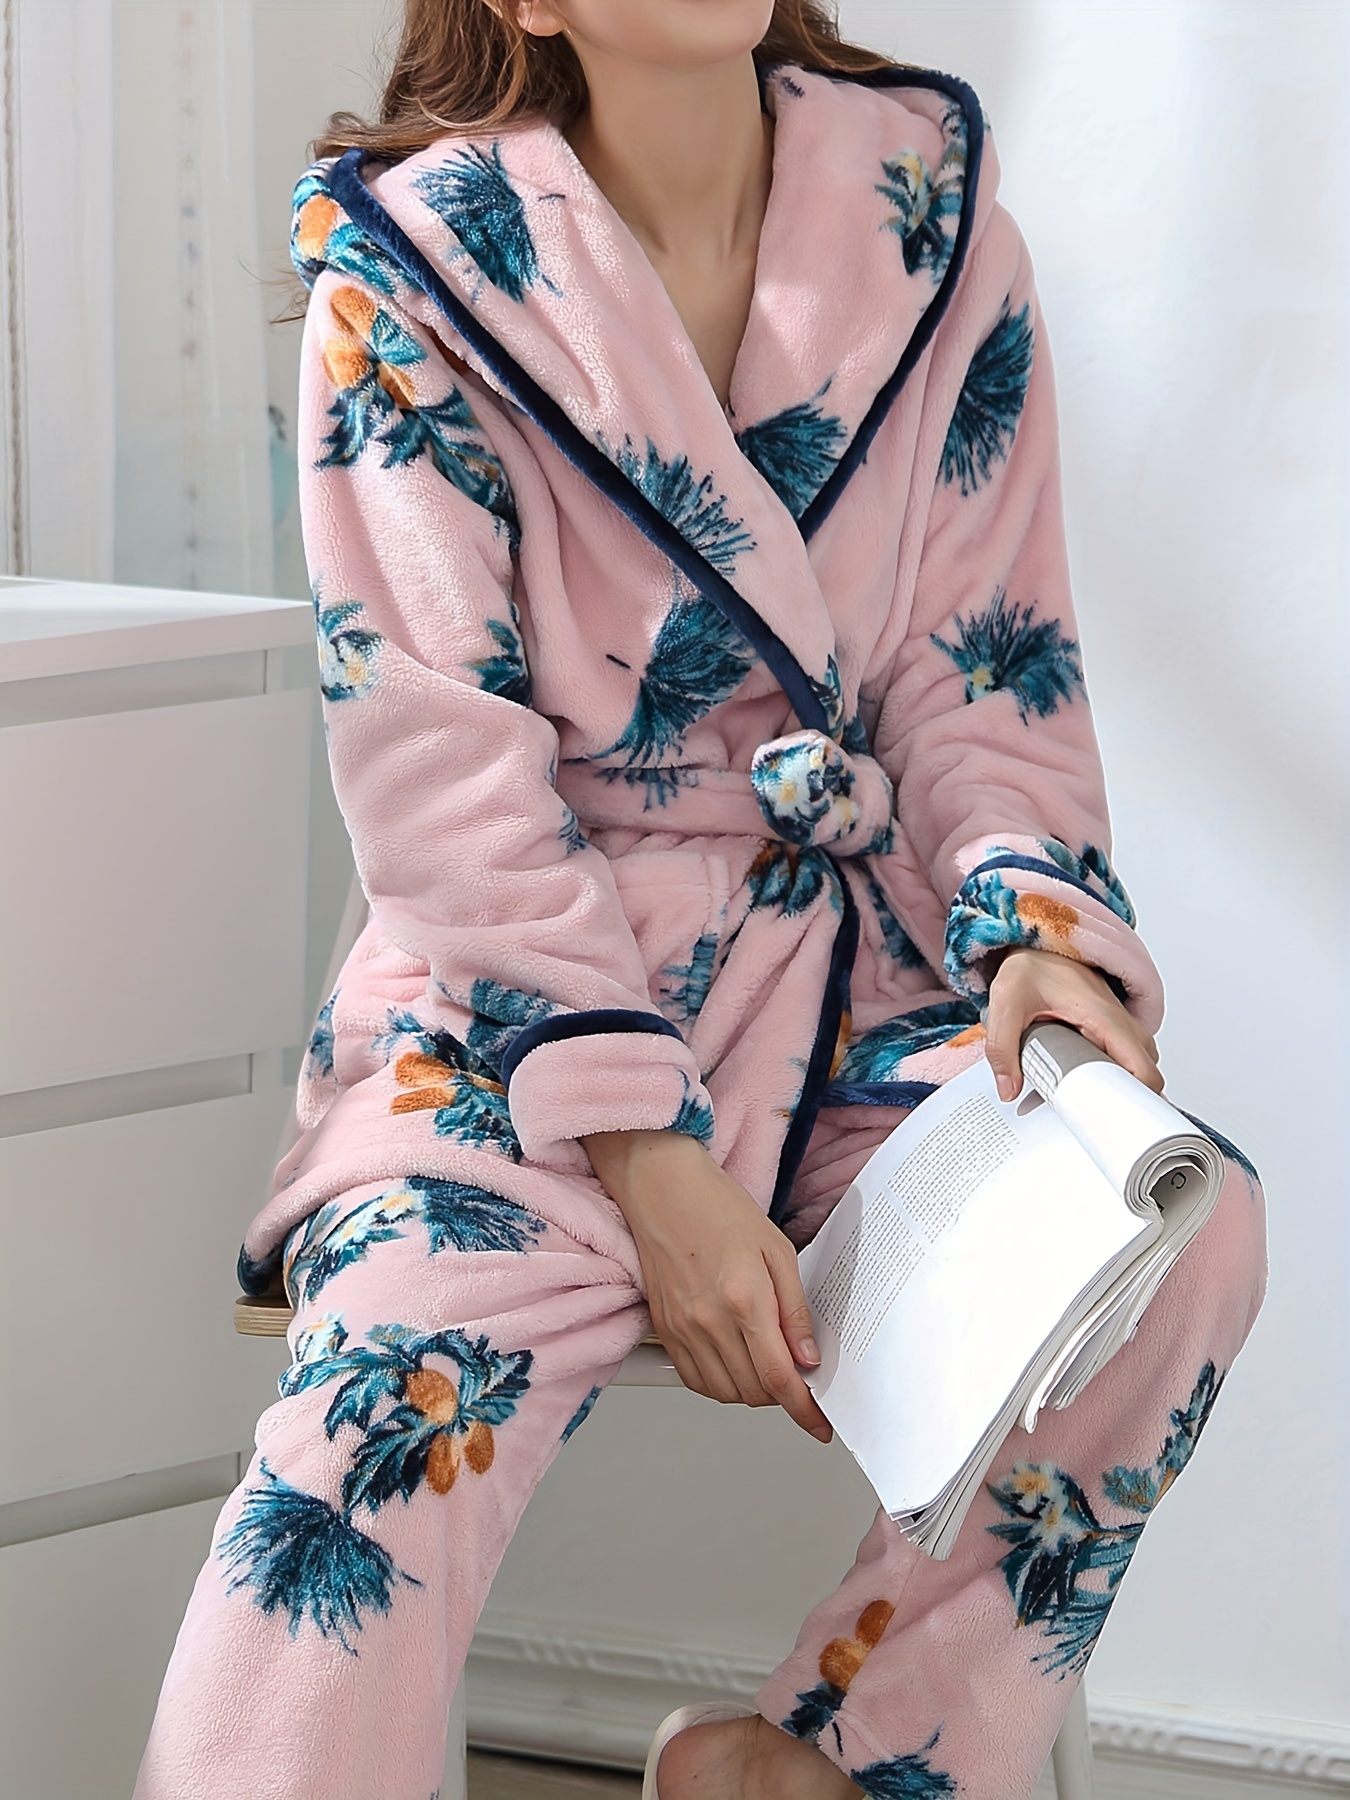 Floral Print Pajama Set, Long Sleeve Fuzzy Robe With Belt, 50% OFF